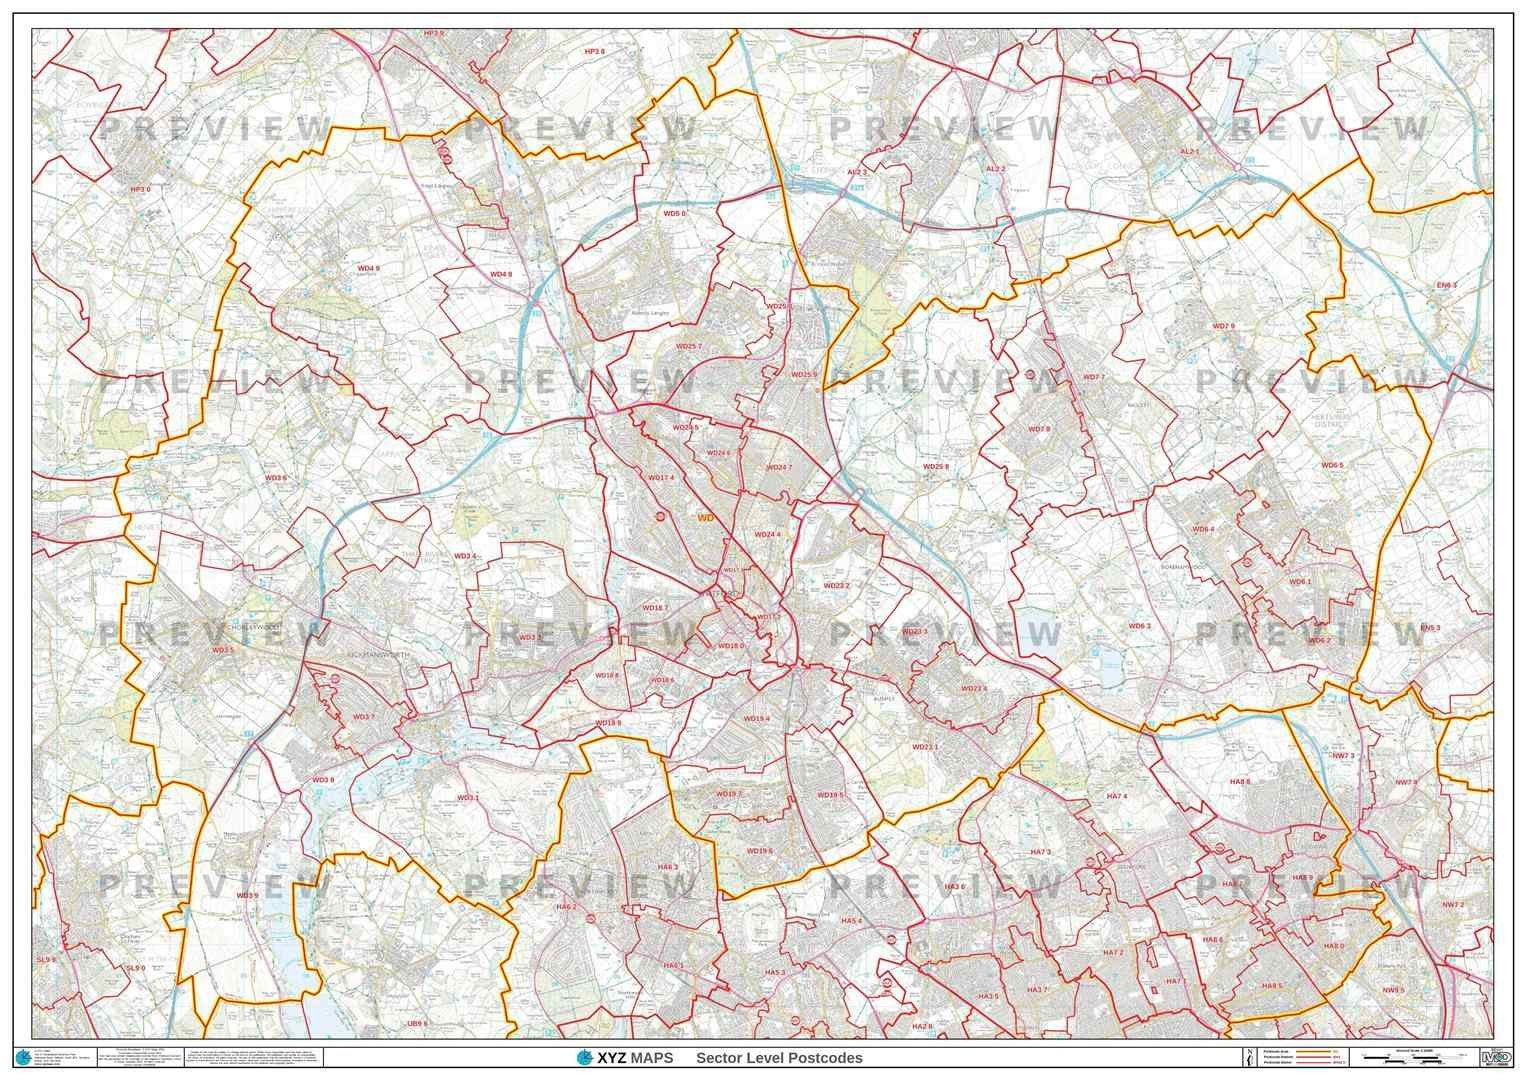 WF Postcode Map for the Wakefield Postcode Area GIF or PDF Download ...